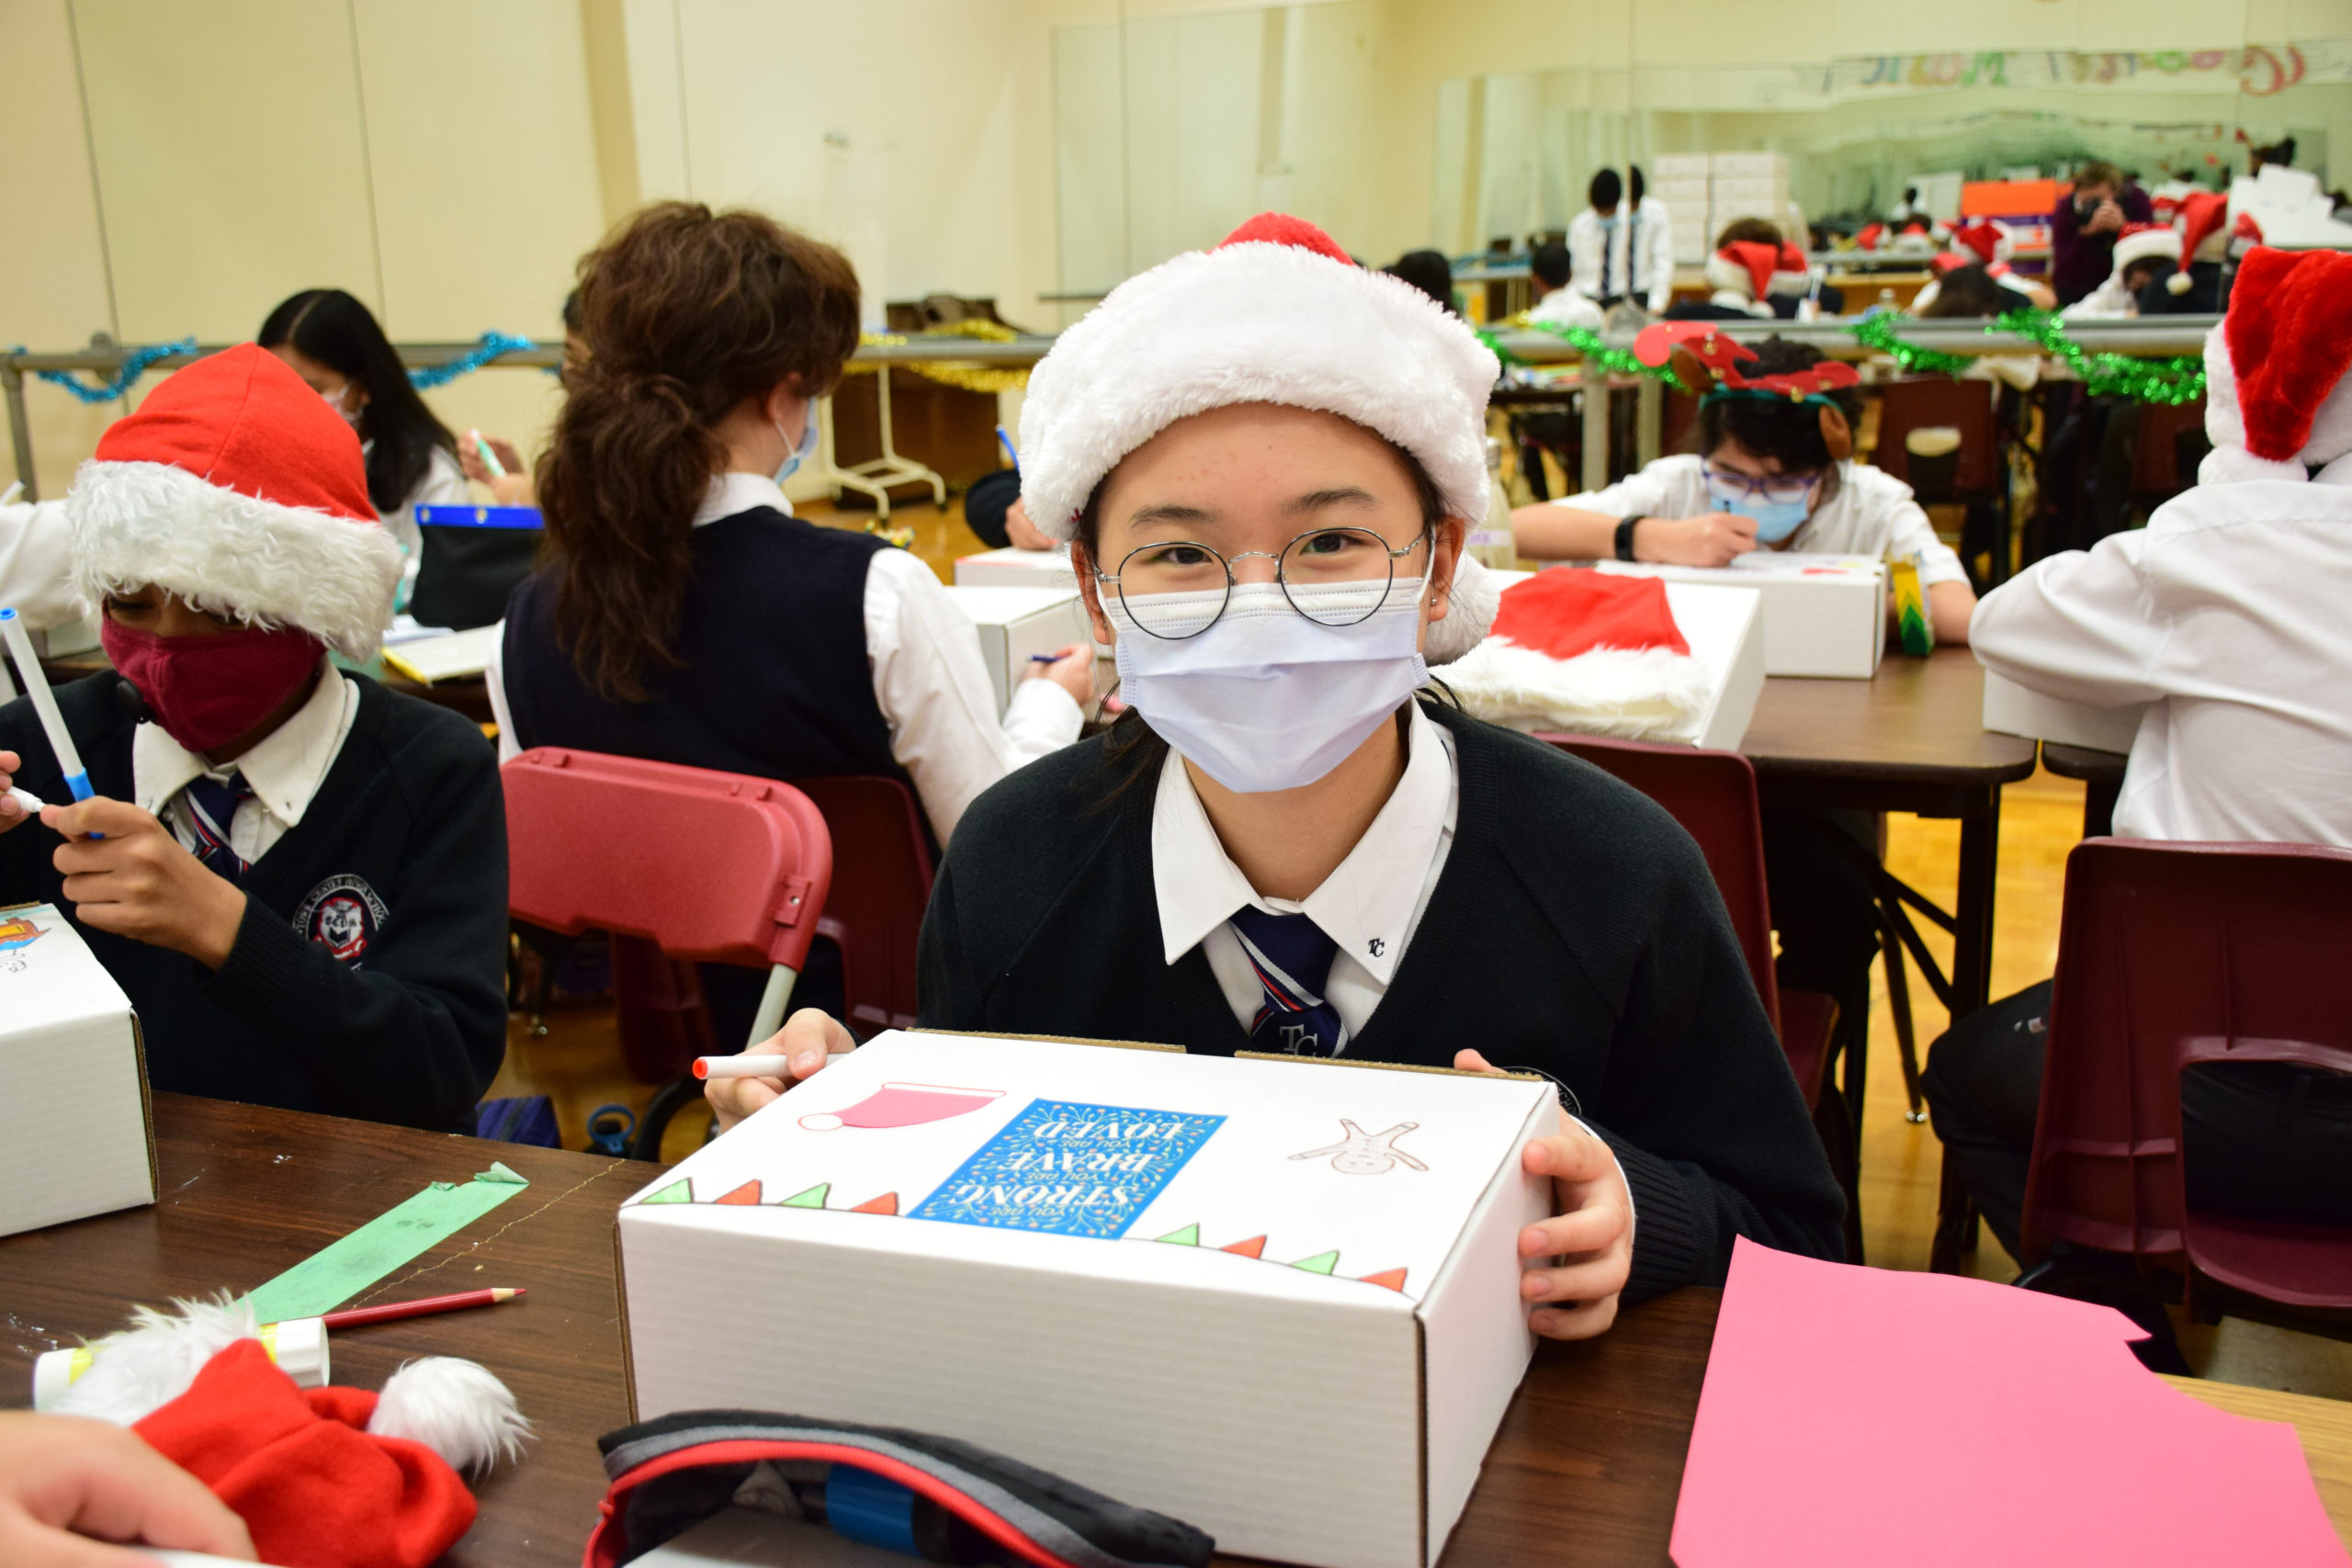 Elementary student working on gift boxes